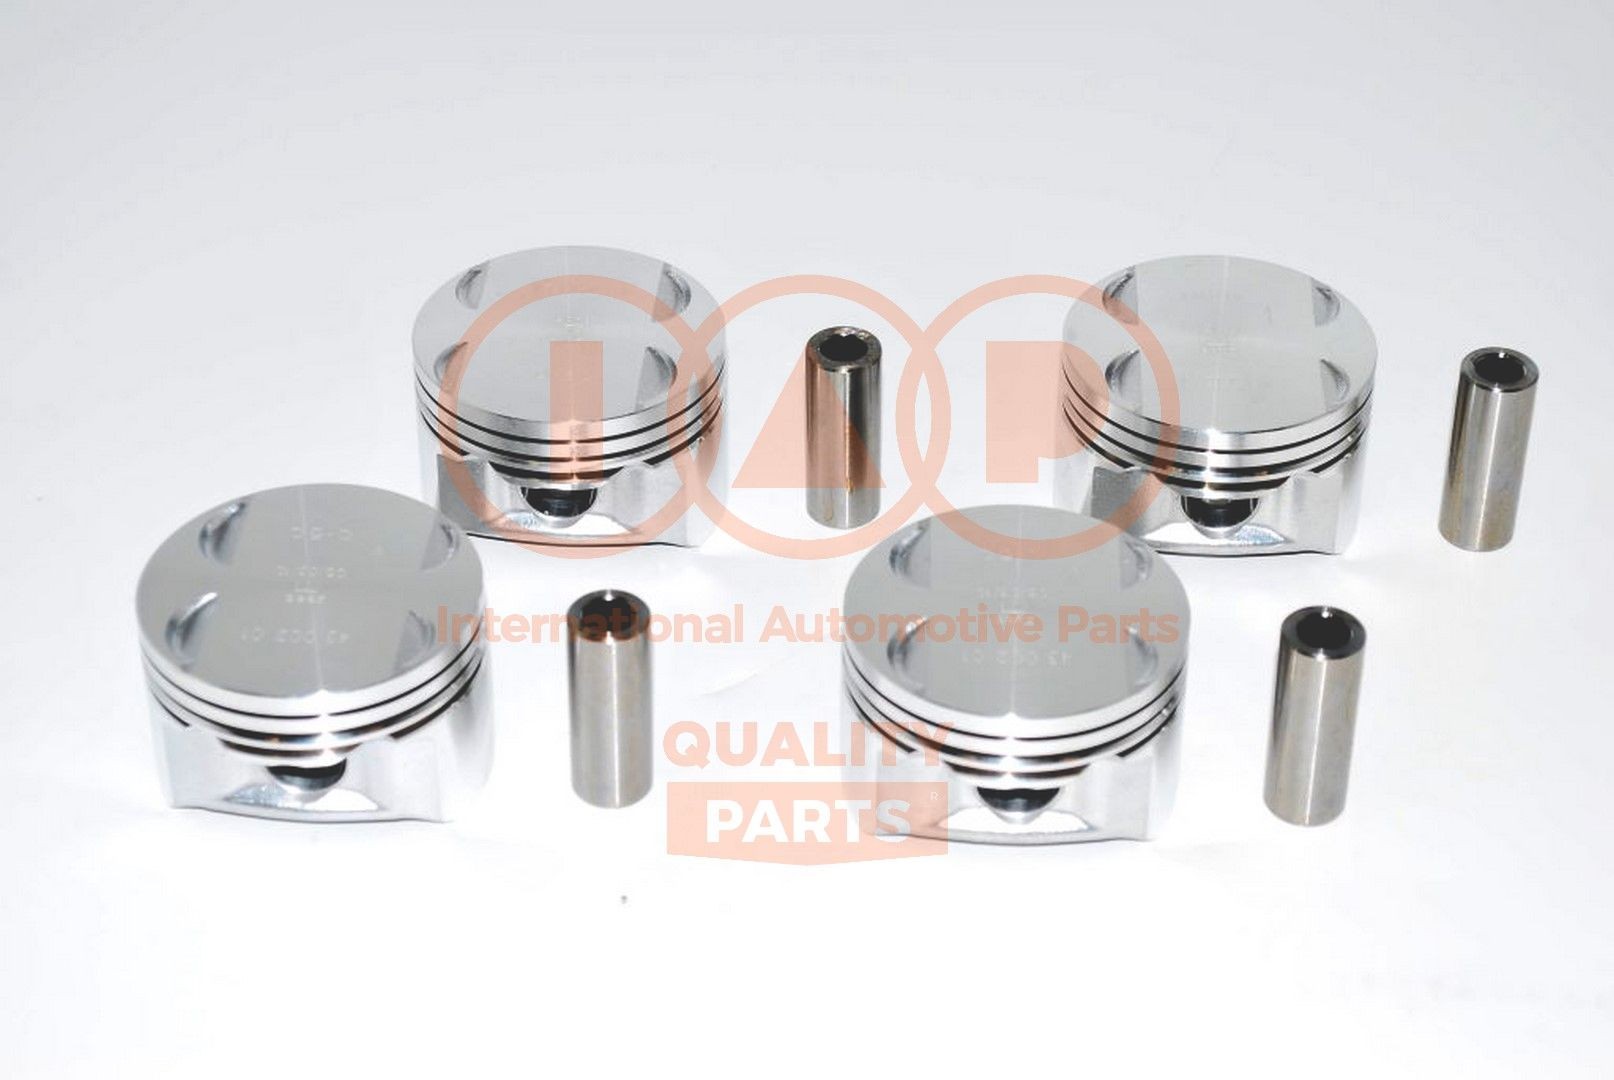 IAP QUALITY PARTS without piston Rings Engine piston 101-25011 buy